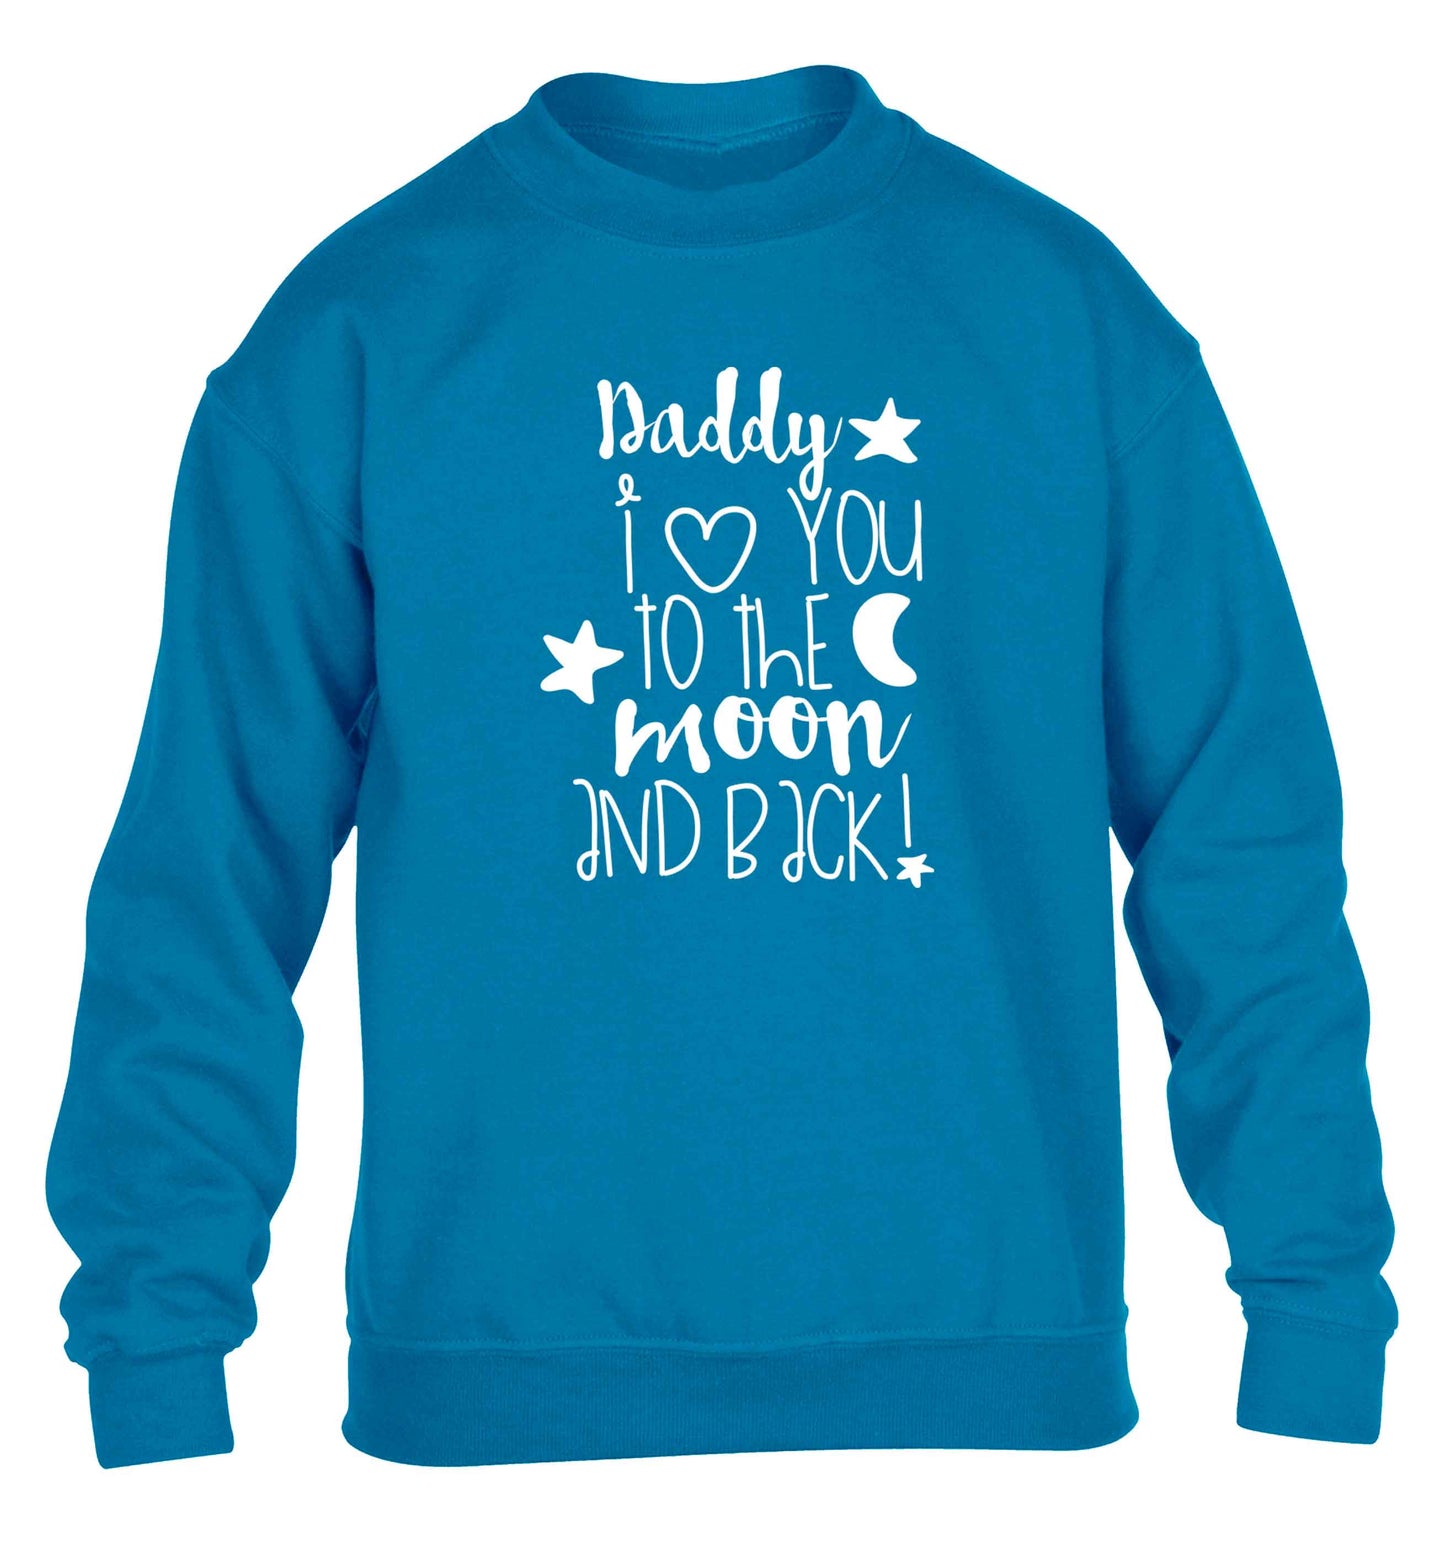 Daddy I love you to the moon and back children's blue sweater 12-13 Years